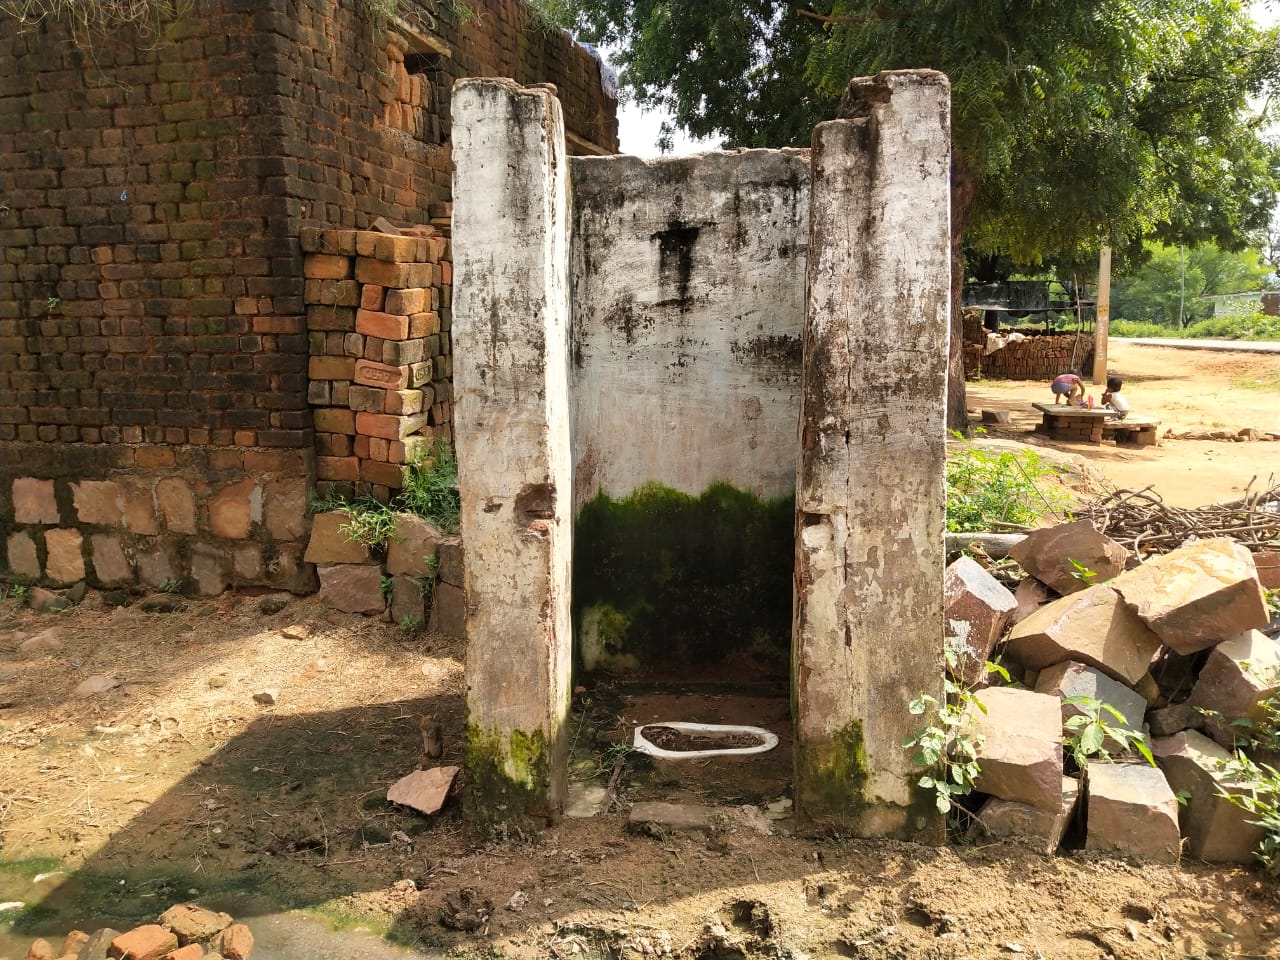 3 thousand 9 unusable, but incomplete if toilets are broken at ground level